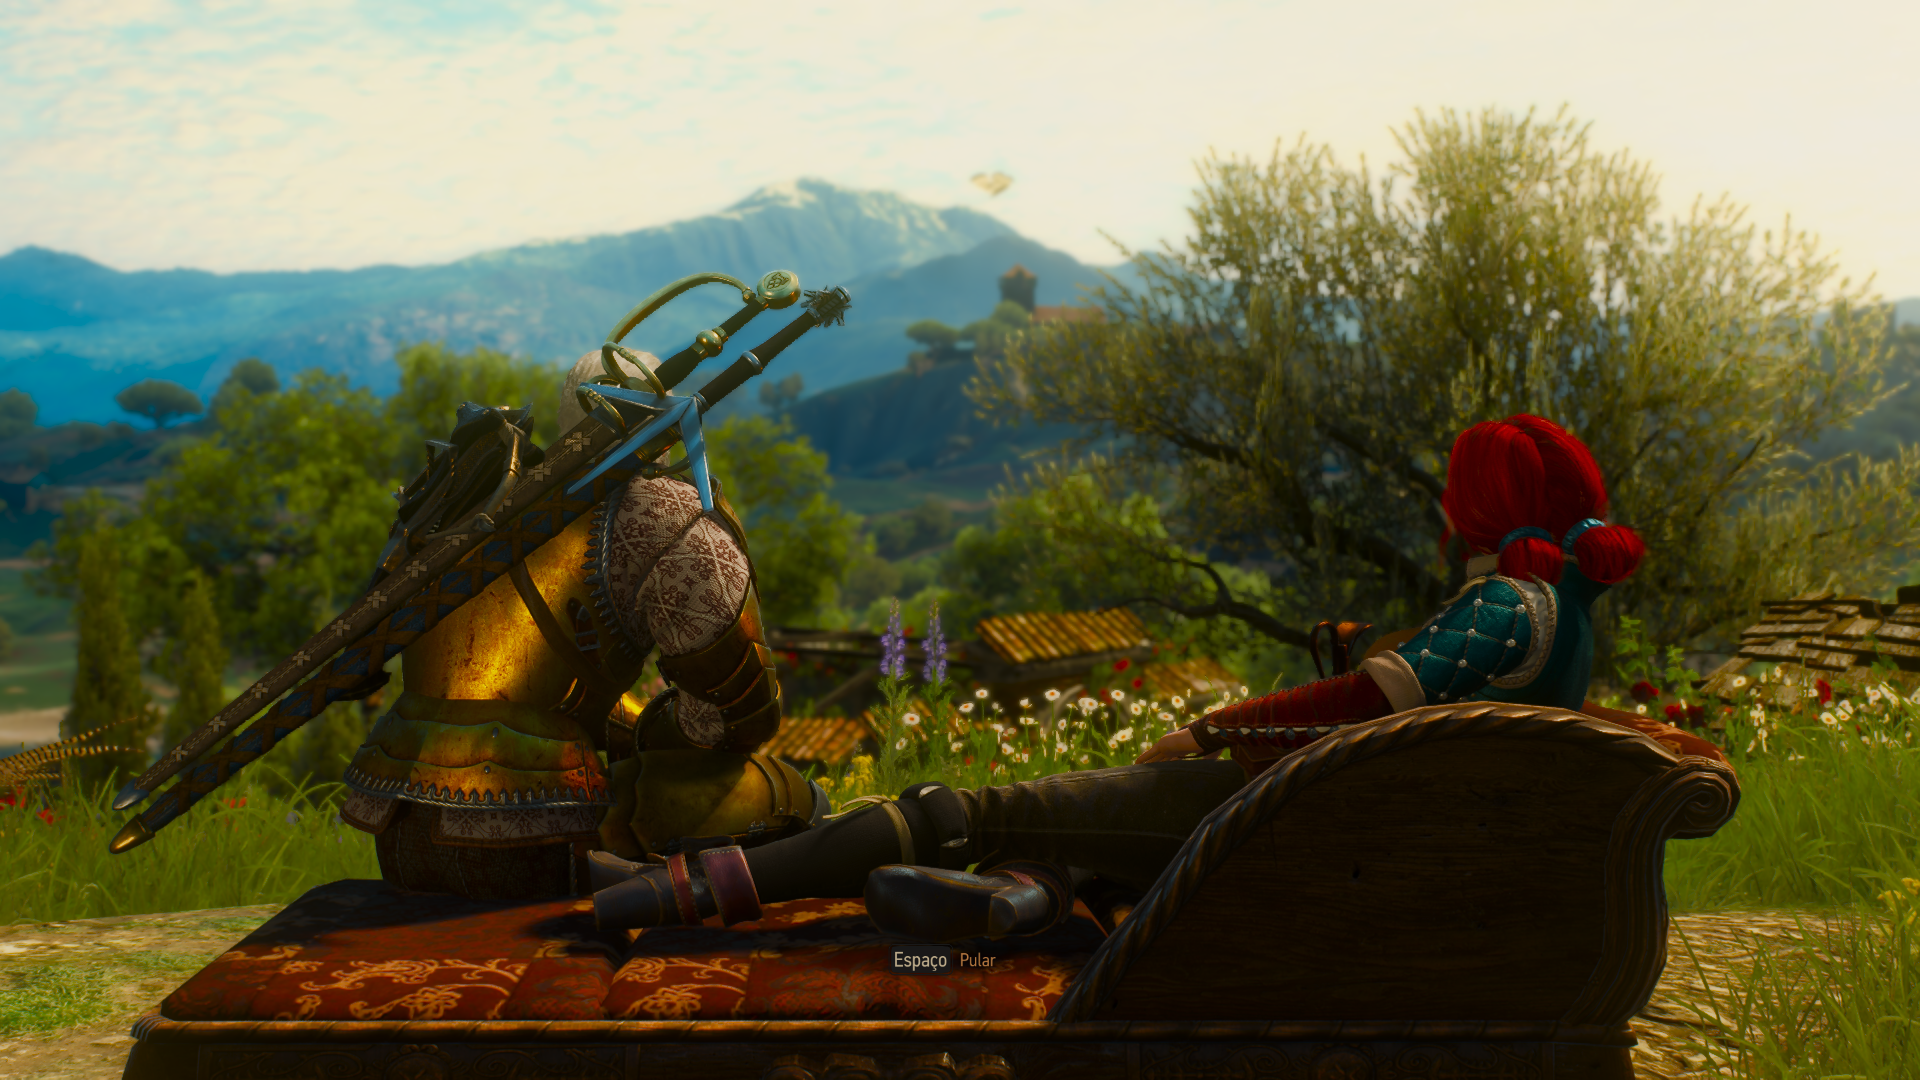 General 1920x1080 The Witcher The Witcher 3: Wild Hunt - Blood and Wine The Witcher 3: Wild Hunt – Hearts of Stone The Witcher 3: Wild Hunt video game art video game characters screen shot